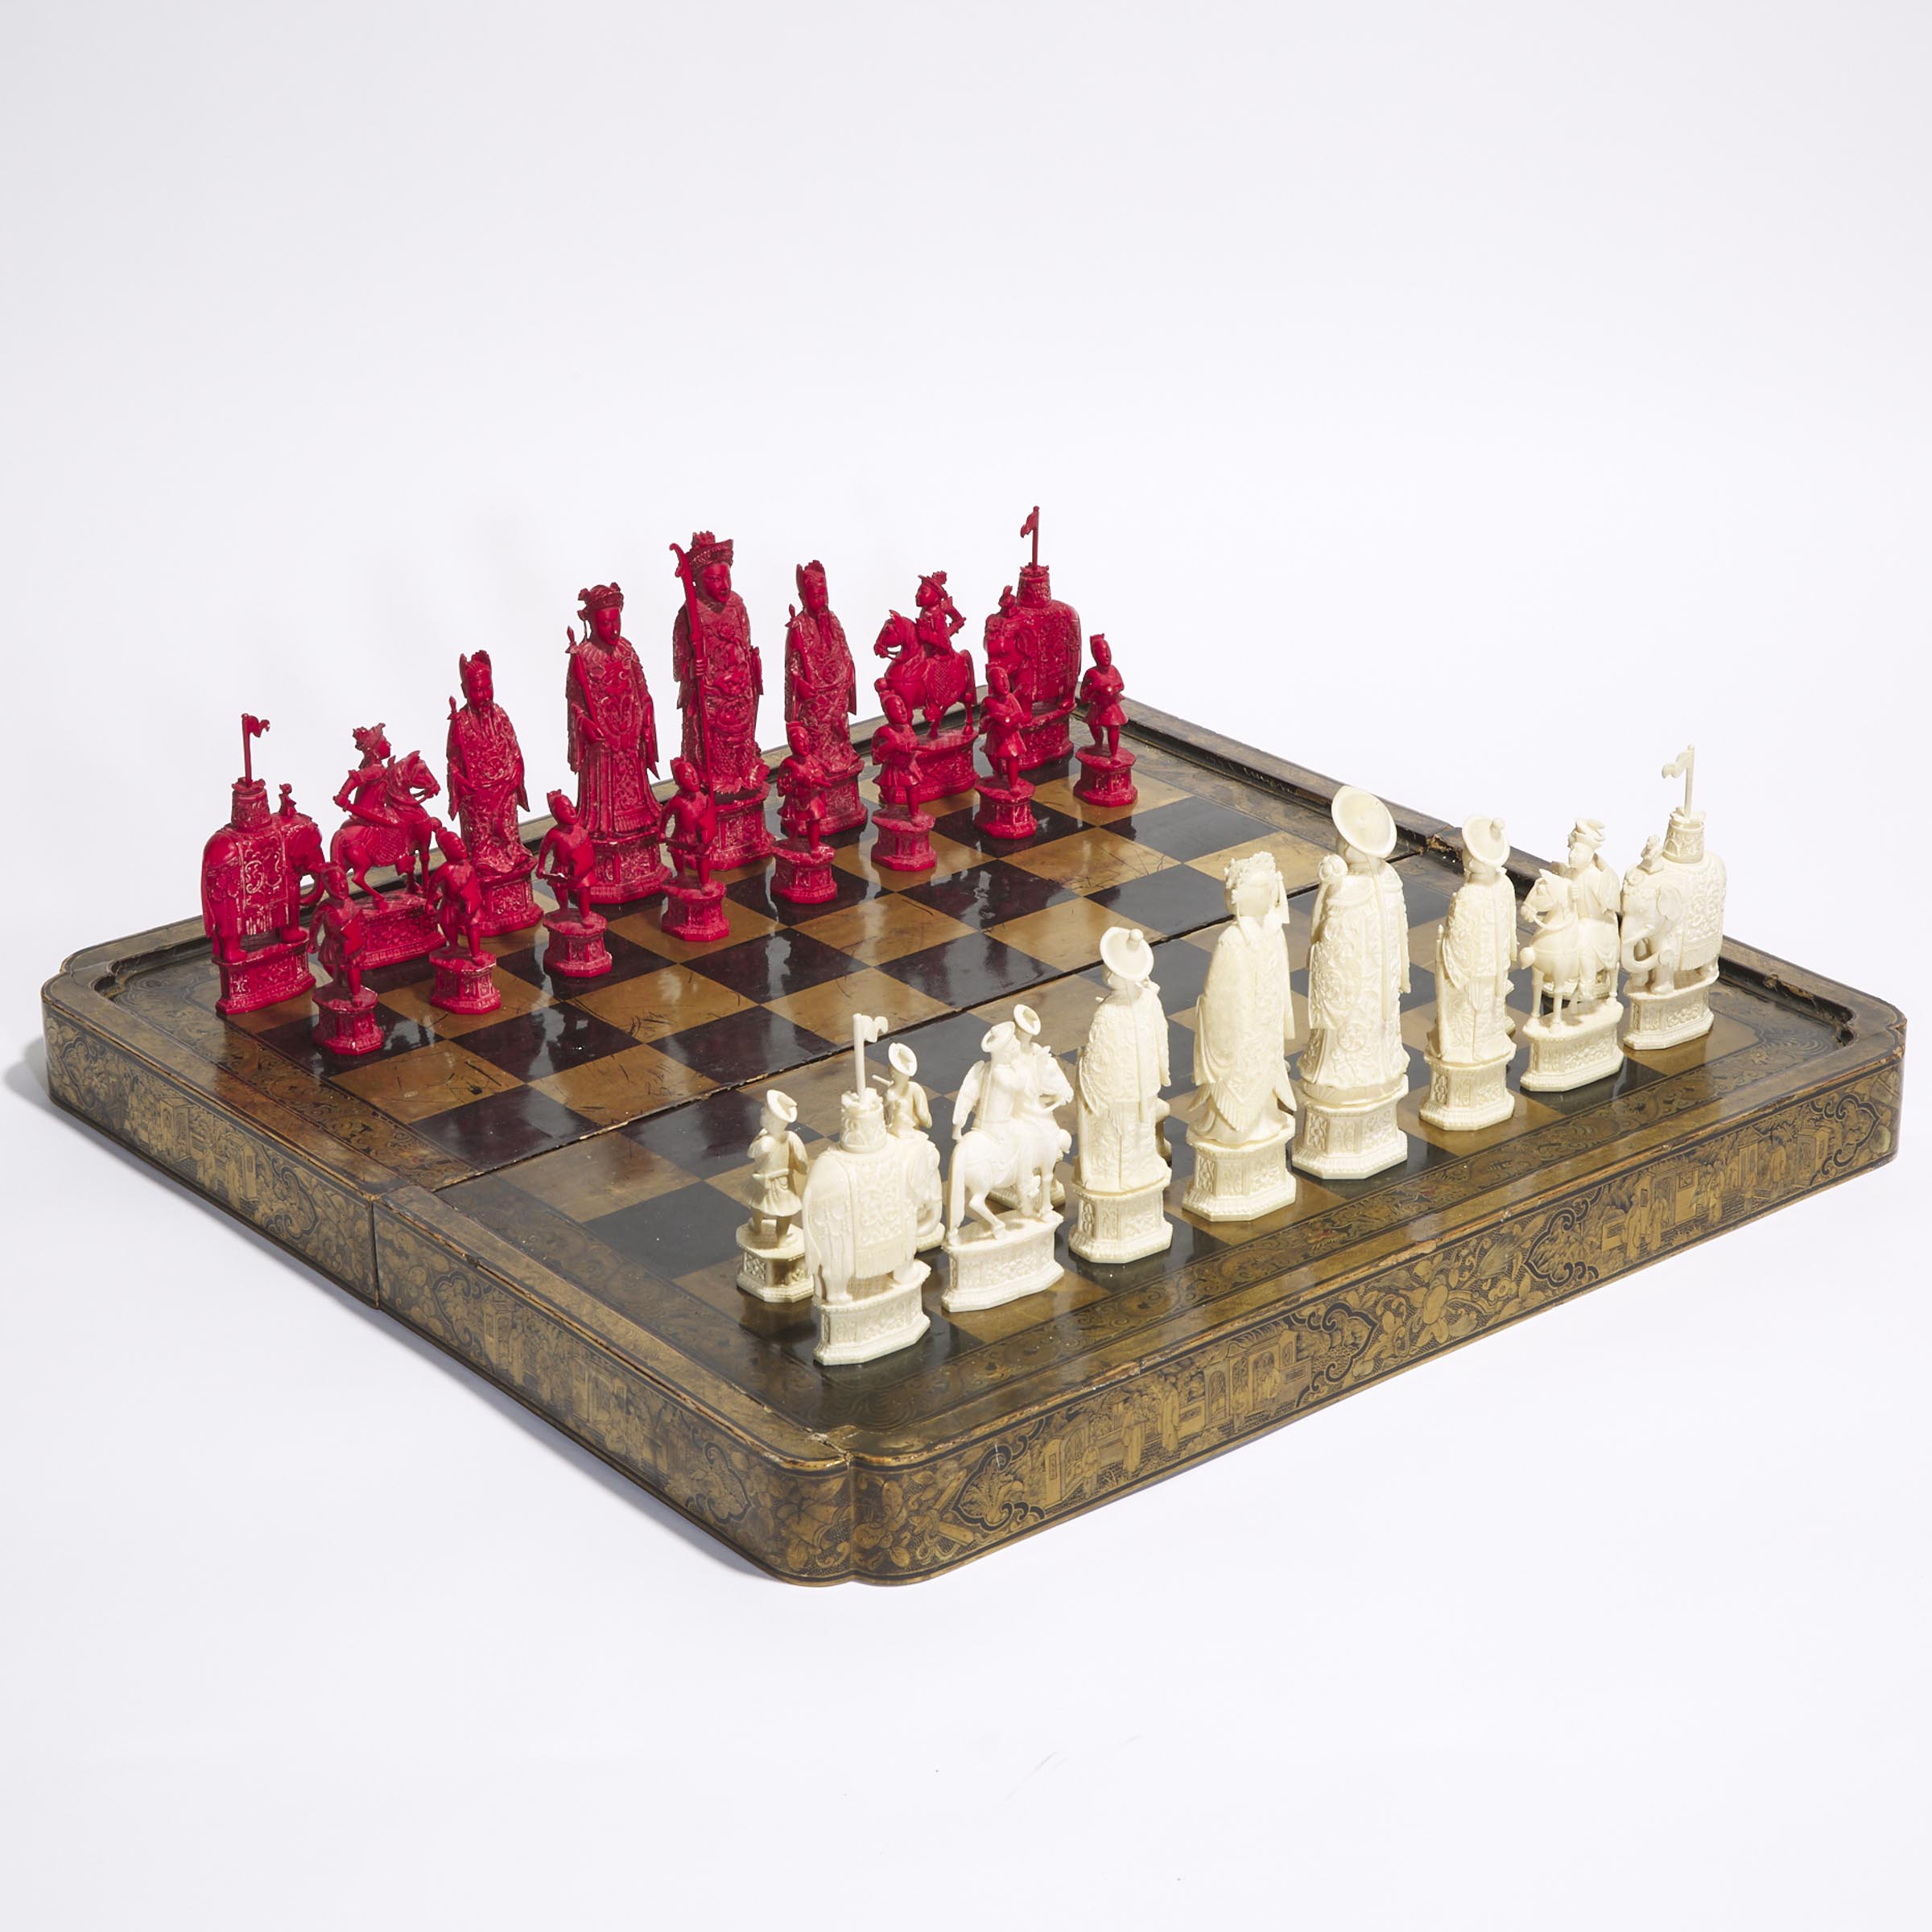 A Chinese Export Ivory Figural Chess Set, Canton, 19th/20th Century